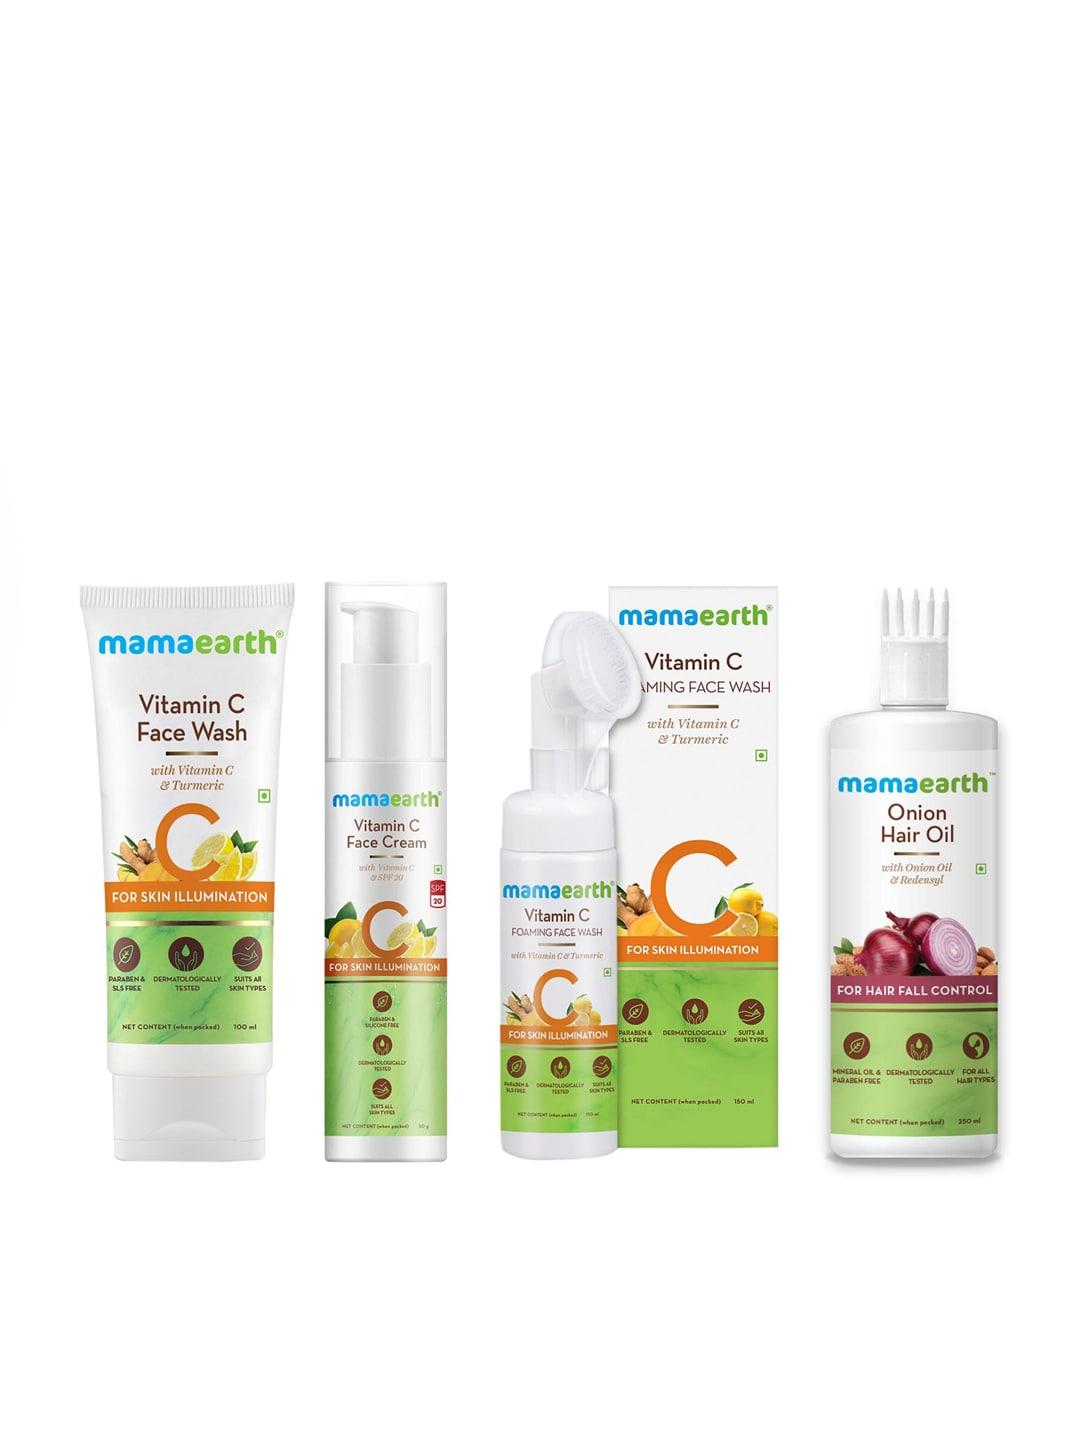 mamaearth unisex set of 2 face washes, face cream & hair oil